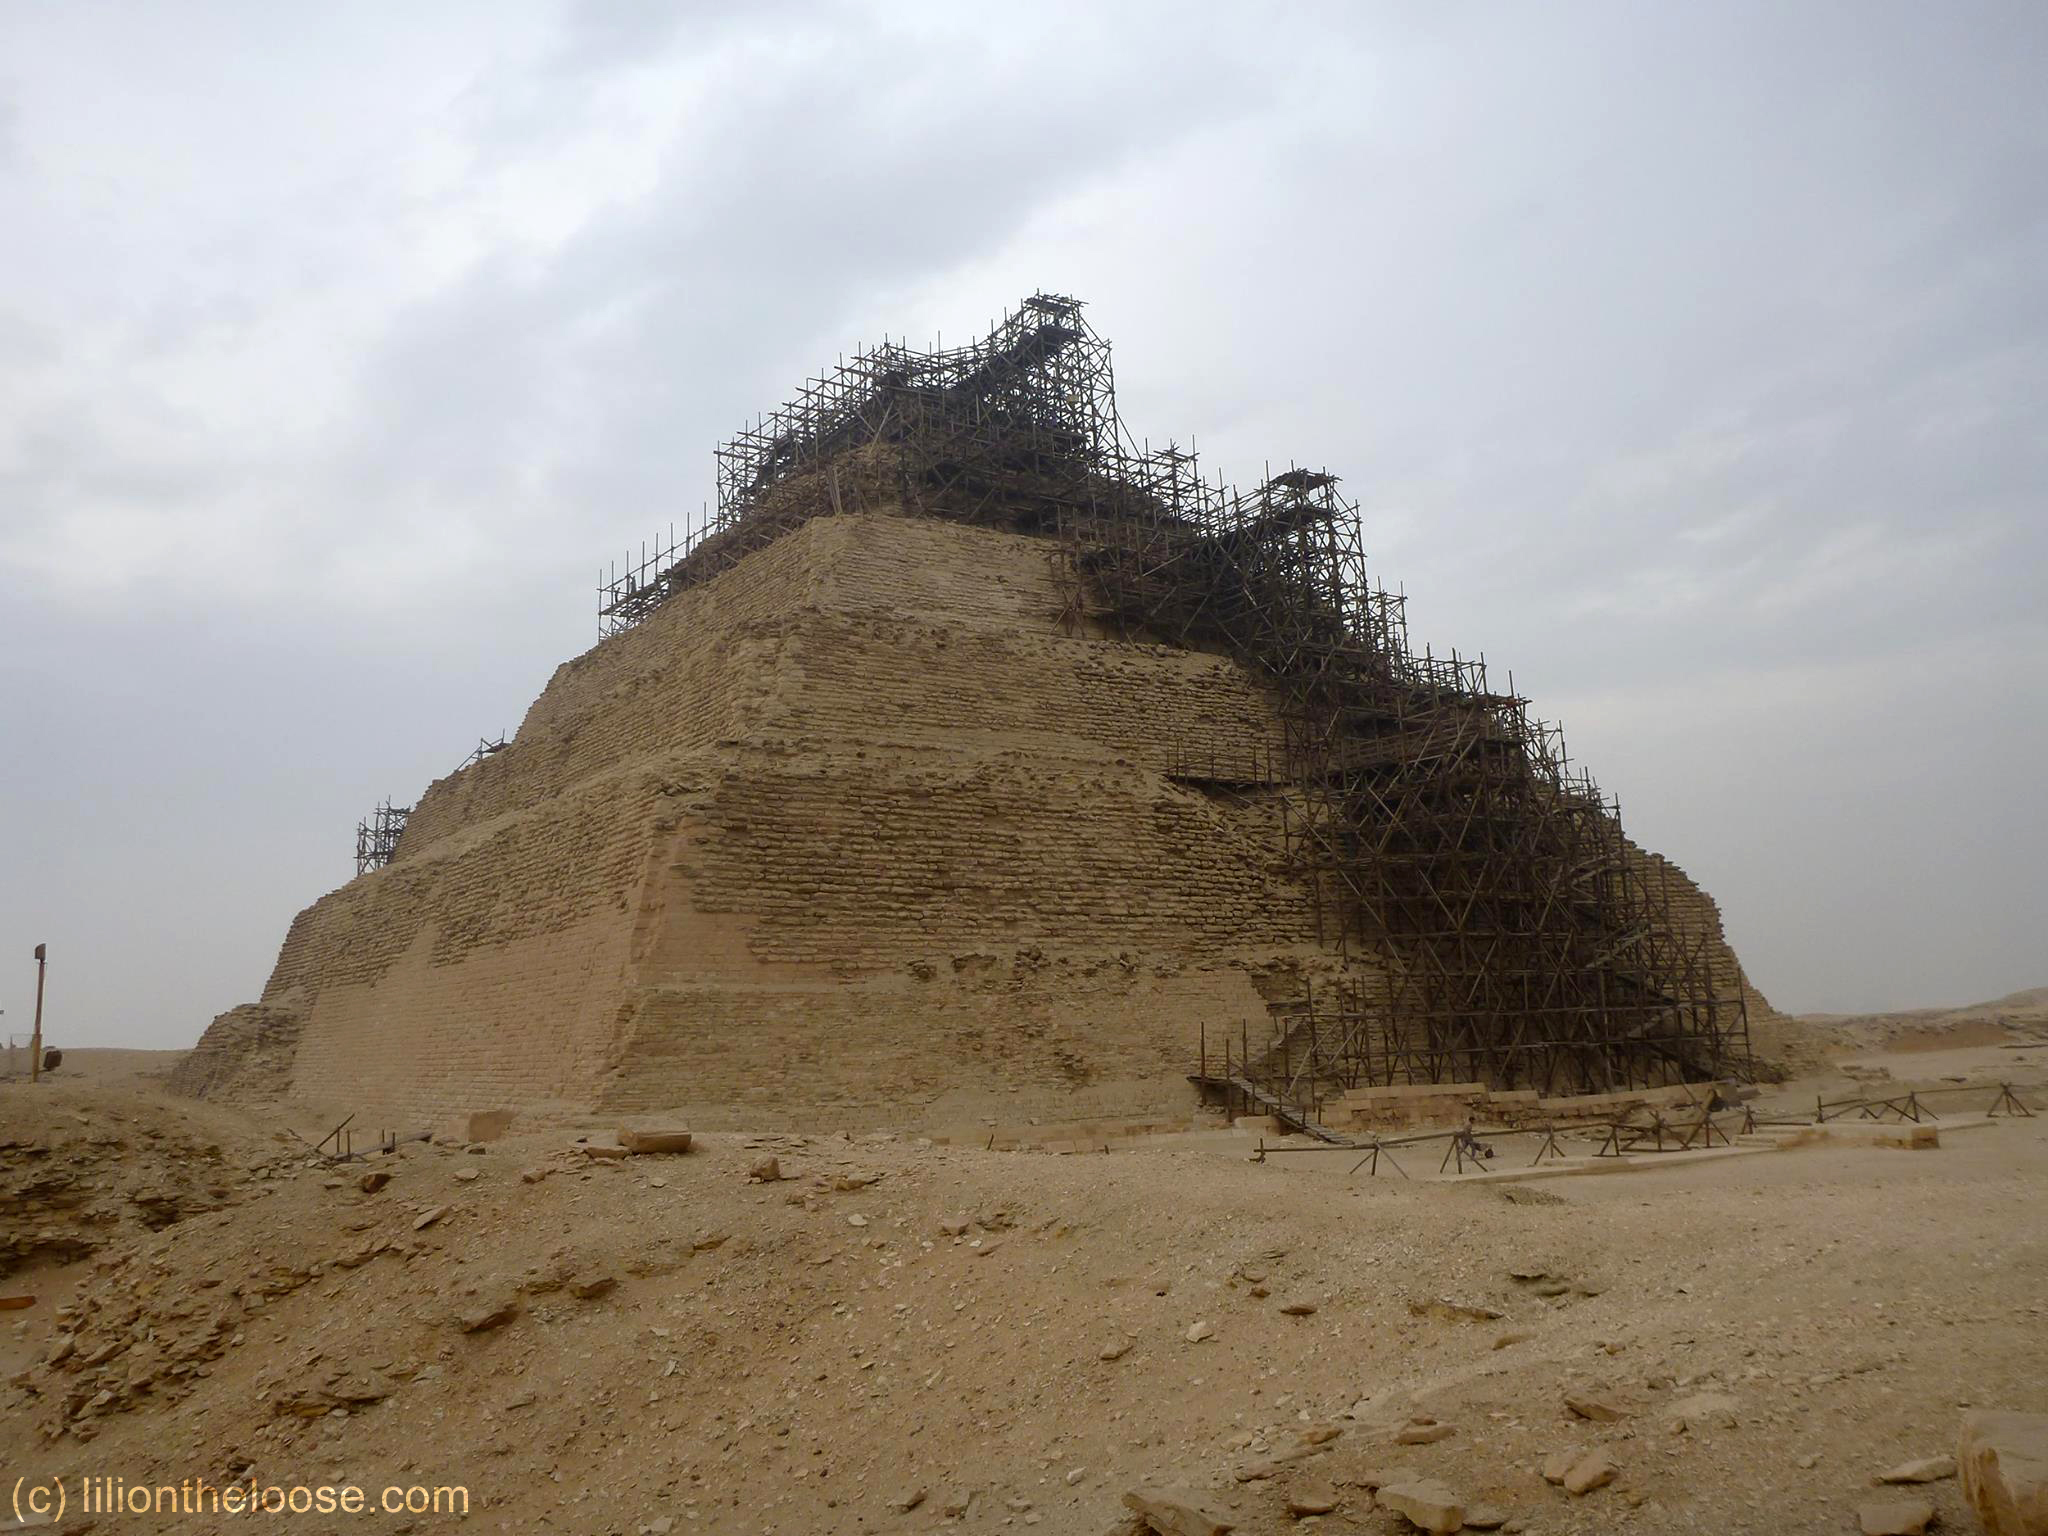 Scaffolding on the Step Pyramid, with a lonely single worker hammering away.